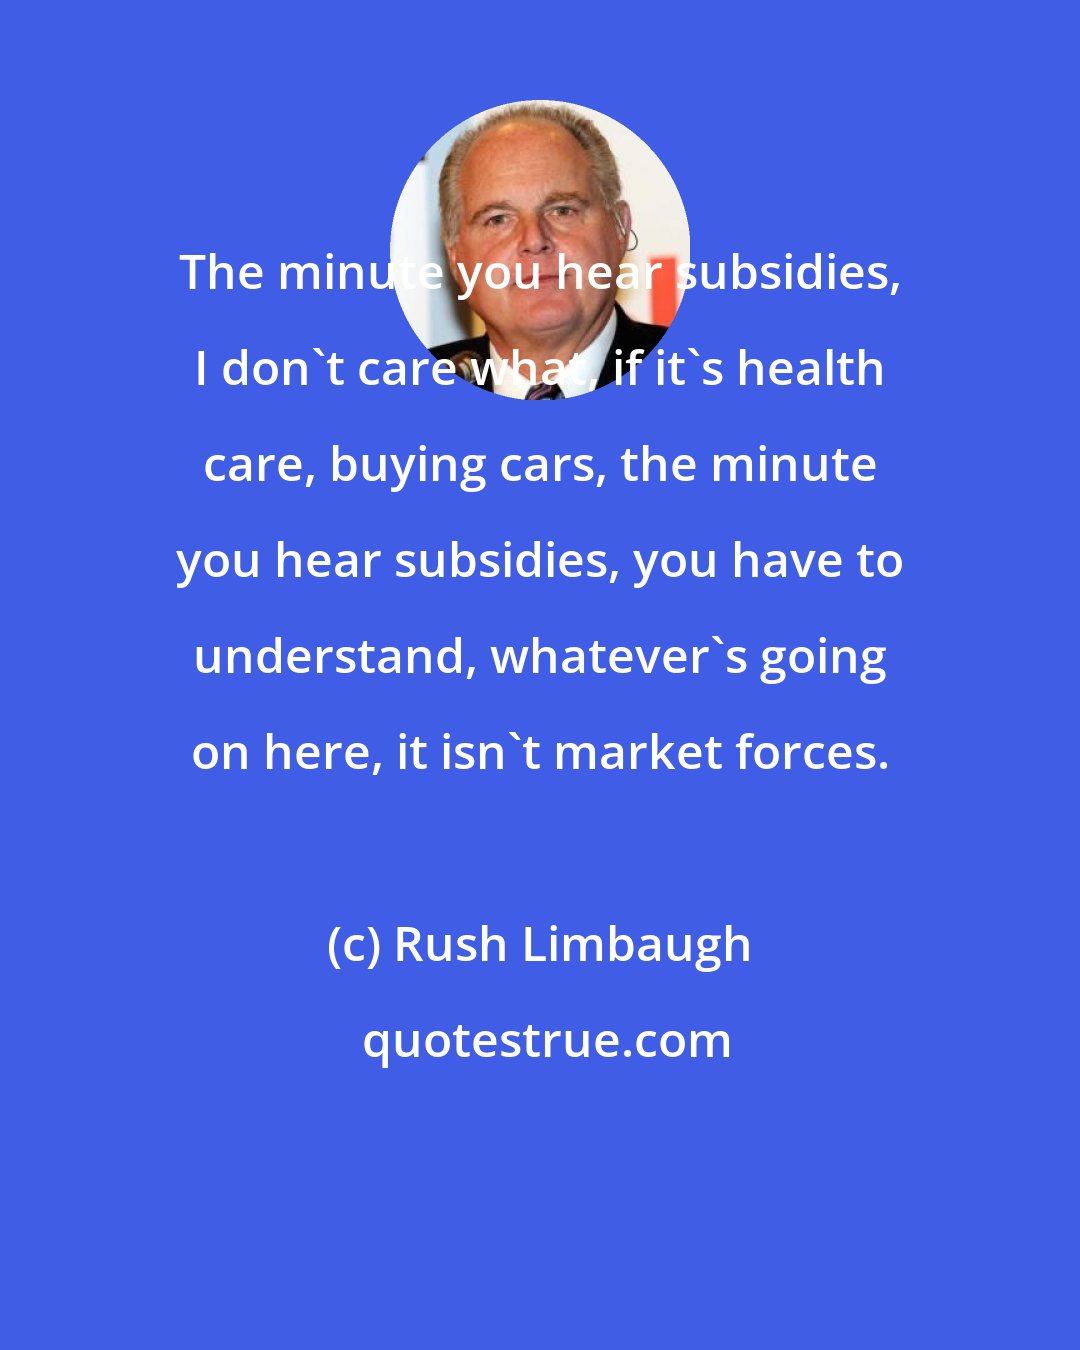 Rush Limbaugh: The minute you hear subsidies, I don't care what, if it's health care, buying cars, the minute you hear subsidies, you have to understand, whatever's going on here, it isn't market forces.